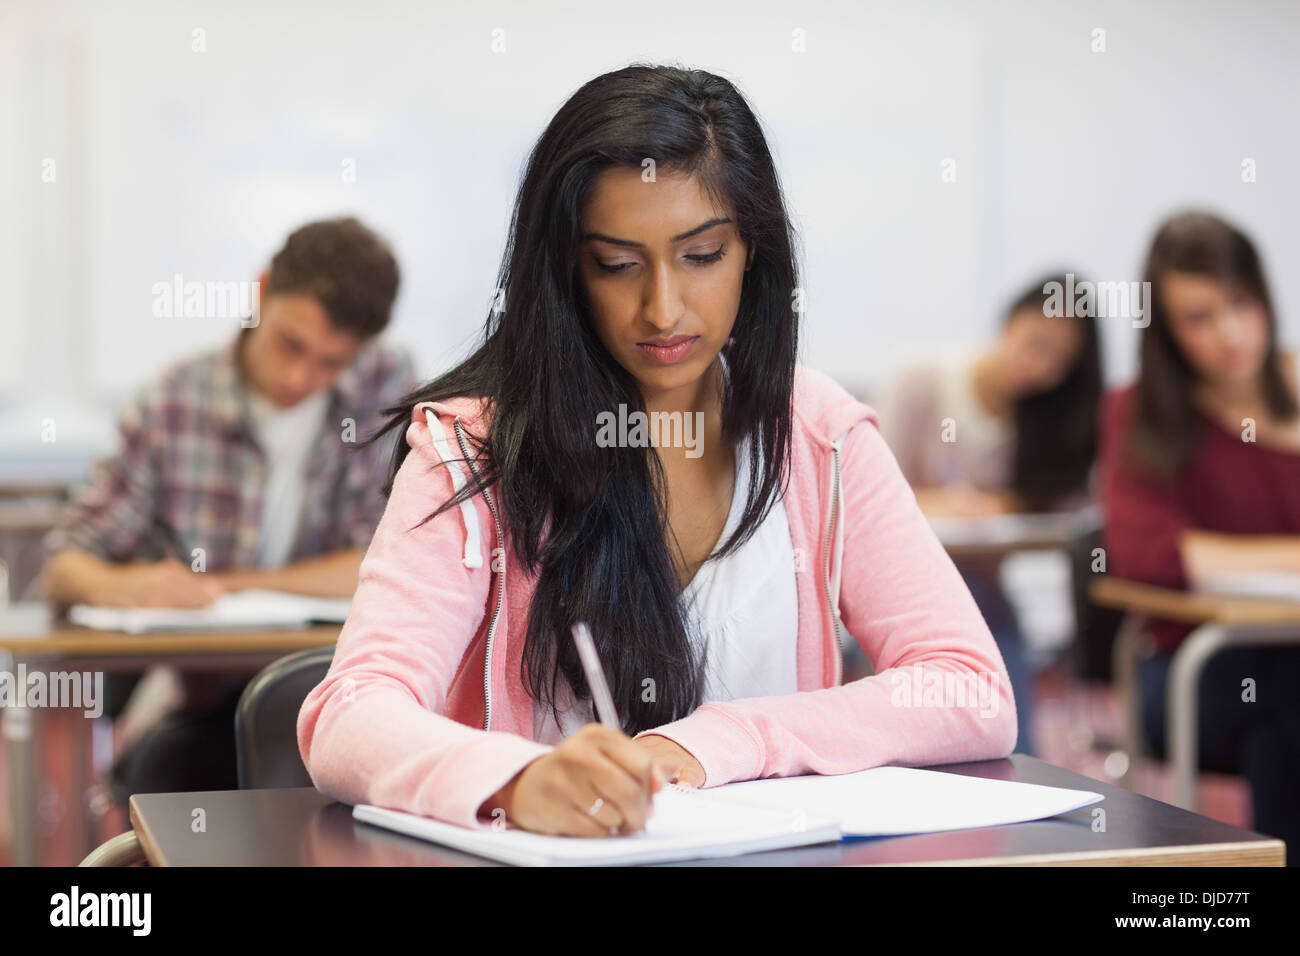 Focused indian student taking notes in class Stock Photo